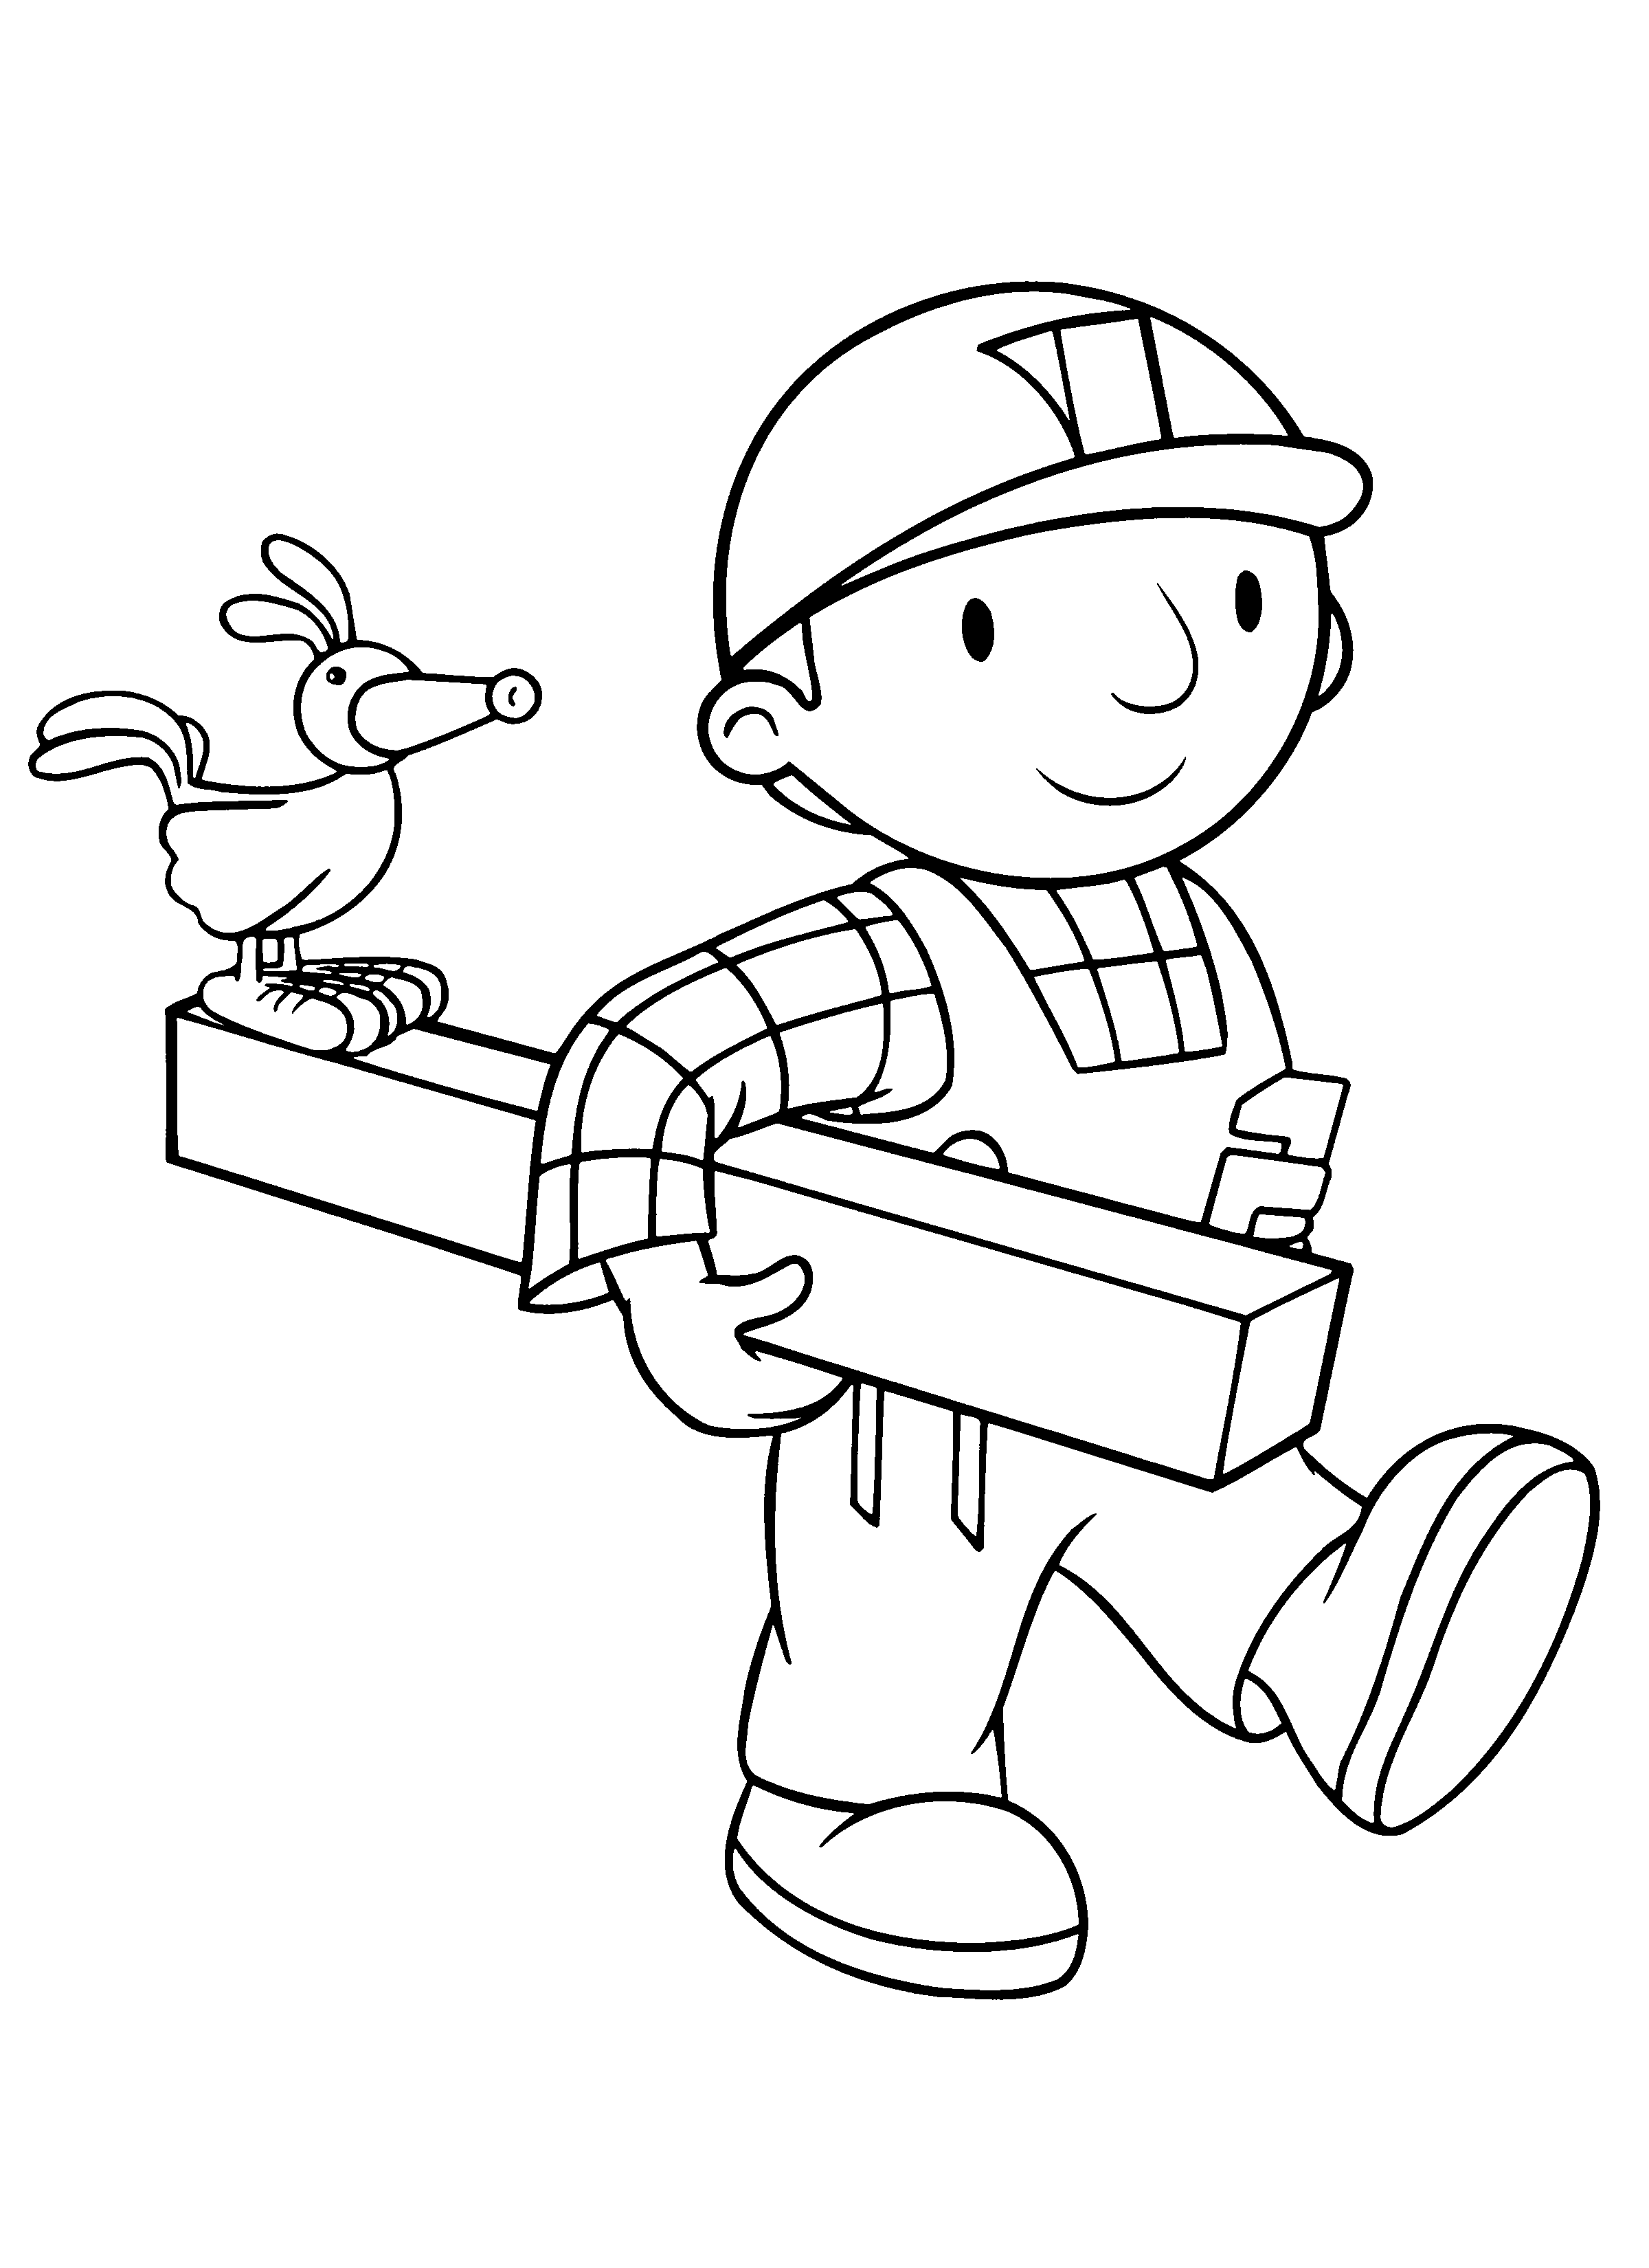 coloring-of-bob-the-handyman-to-download-free-bob-the-builder-kids-coloring-pages